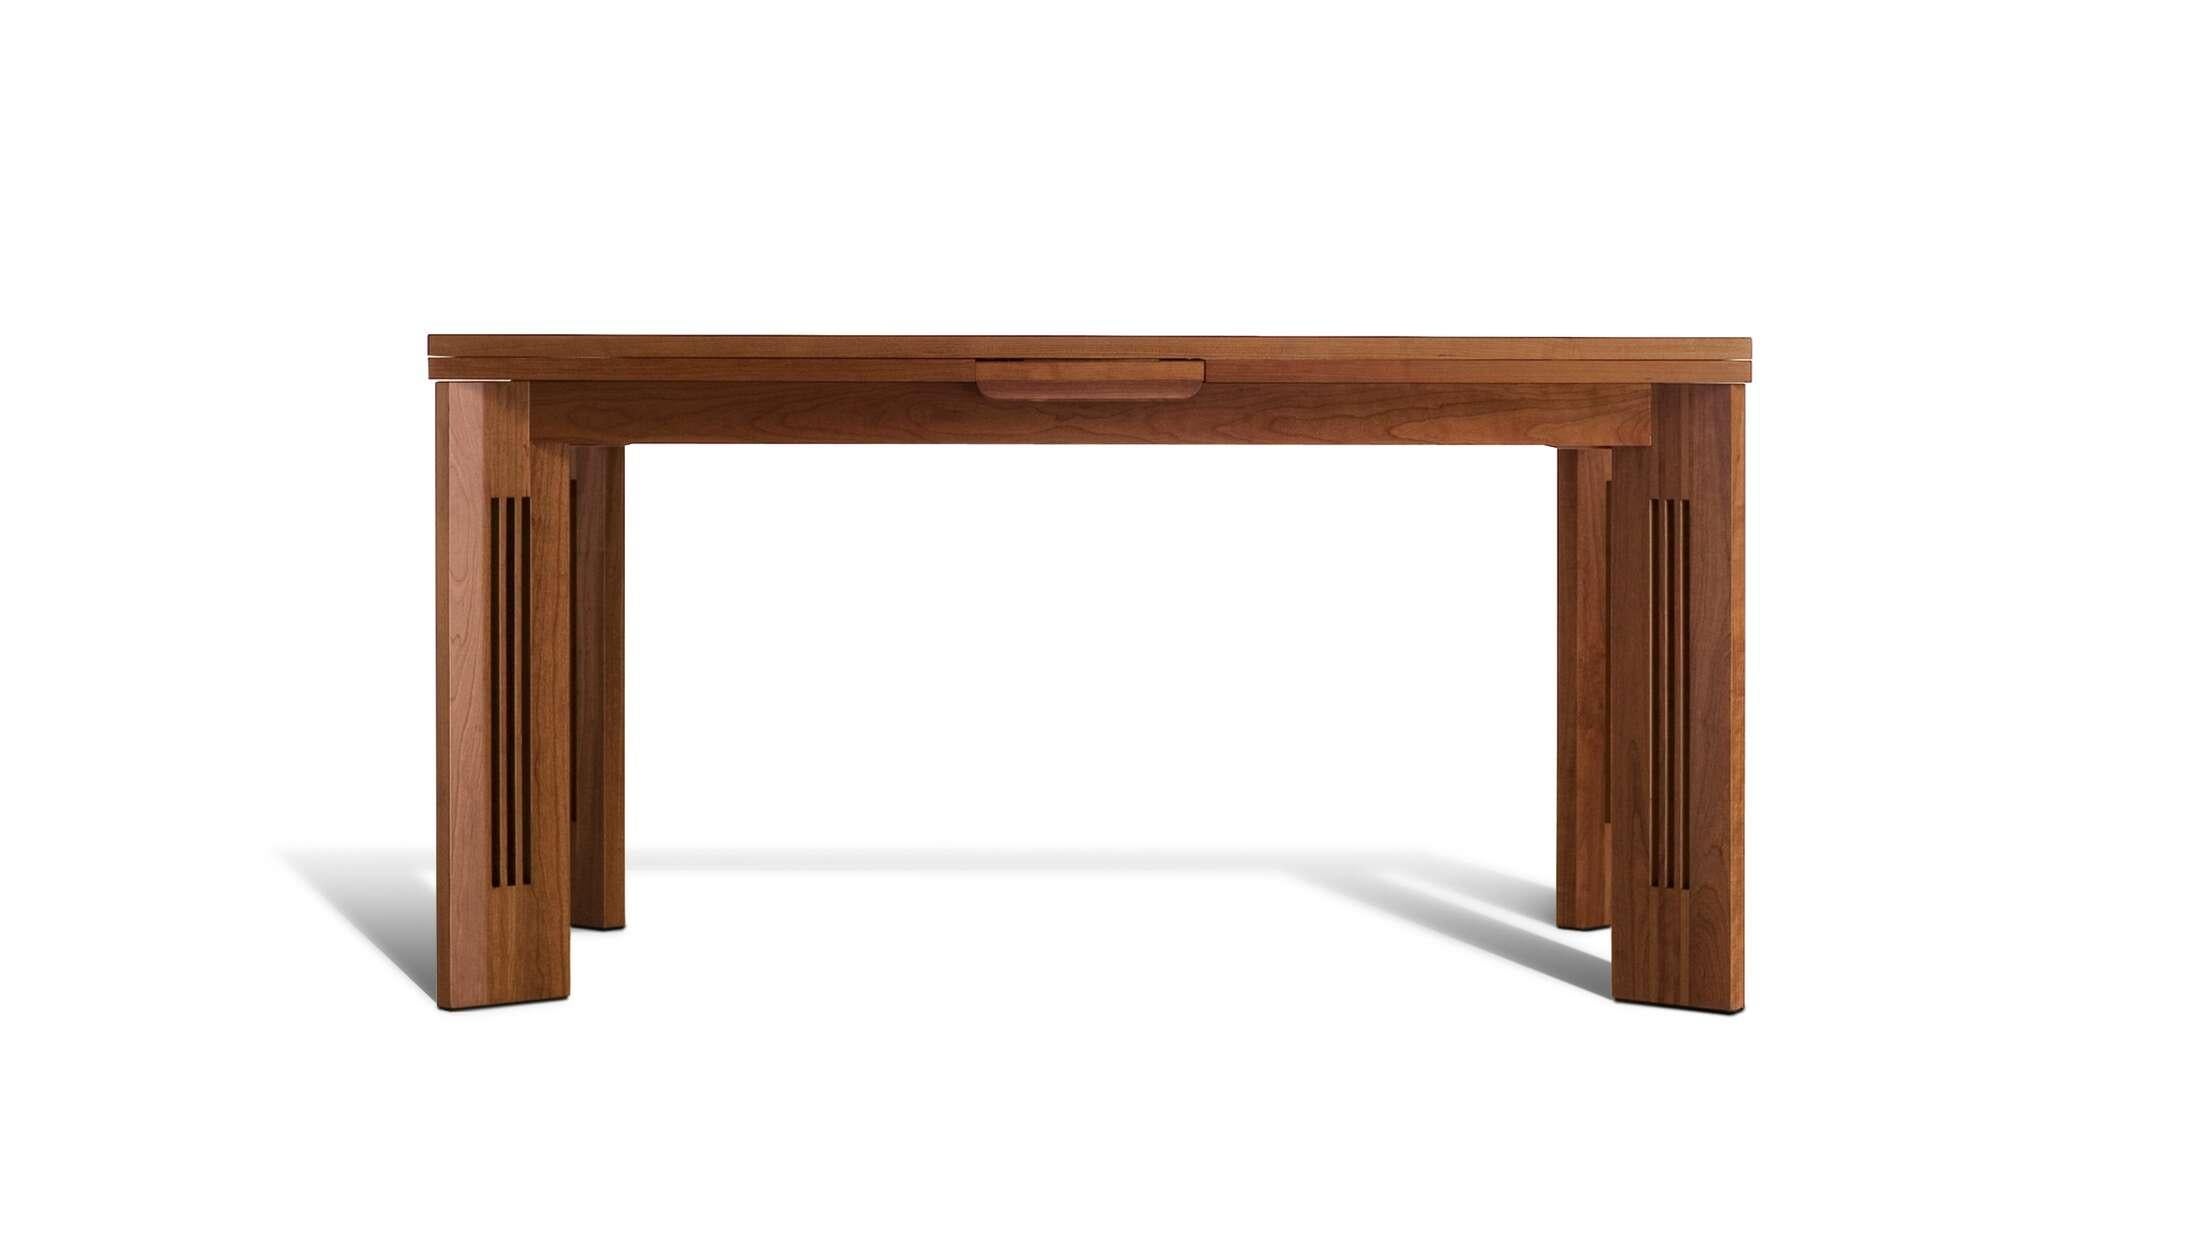 Prices vary dependent on the size/model and material of the product. 

An extendable table (max. width: 265 cm) in cherry, exemplifying the perfect balance between Classic and contemporary, designed by Charles Rennie Mackintosh in 1905. The unique